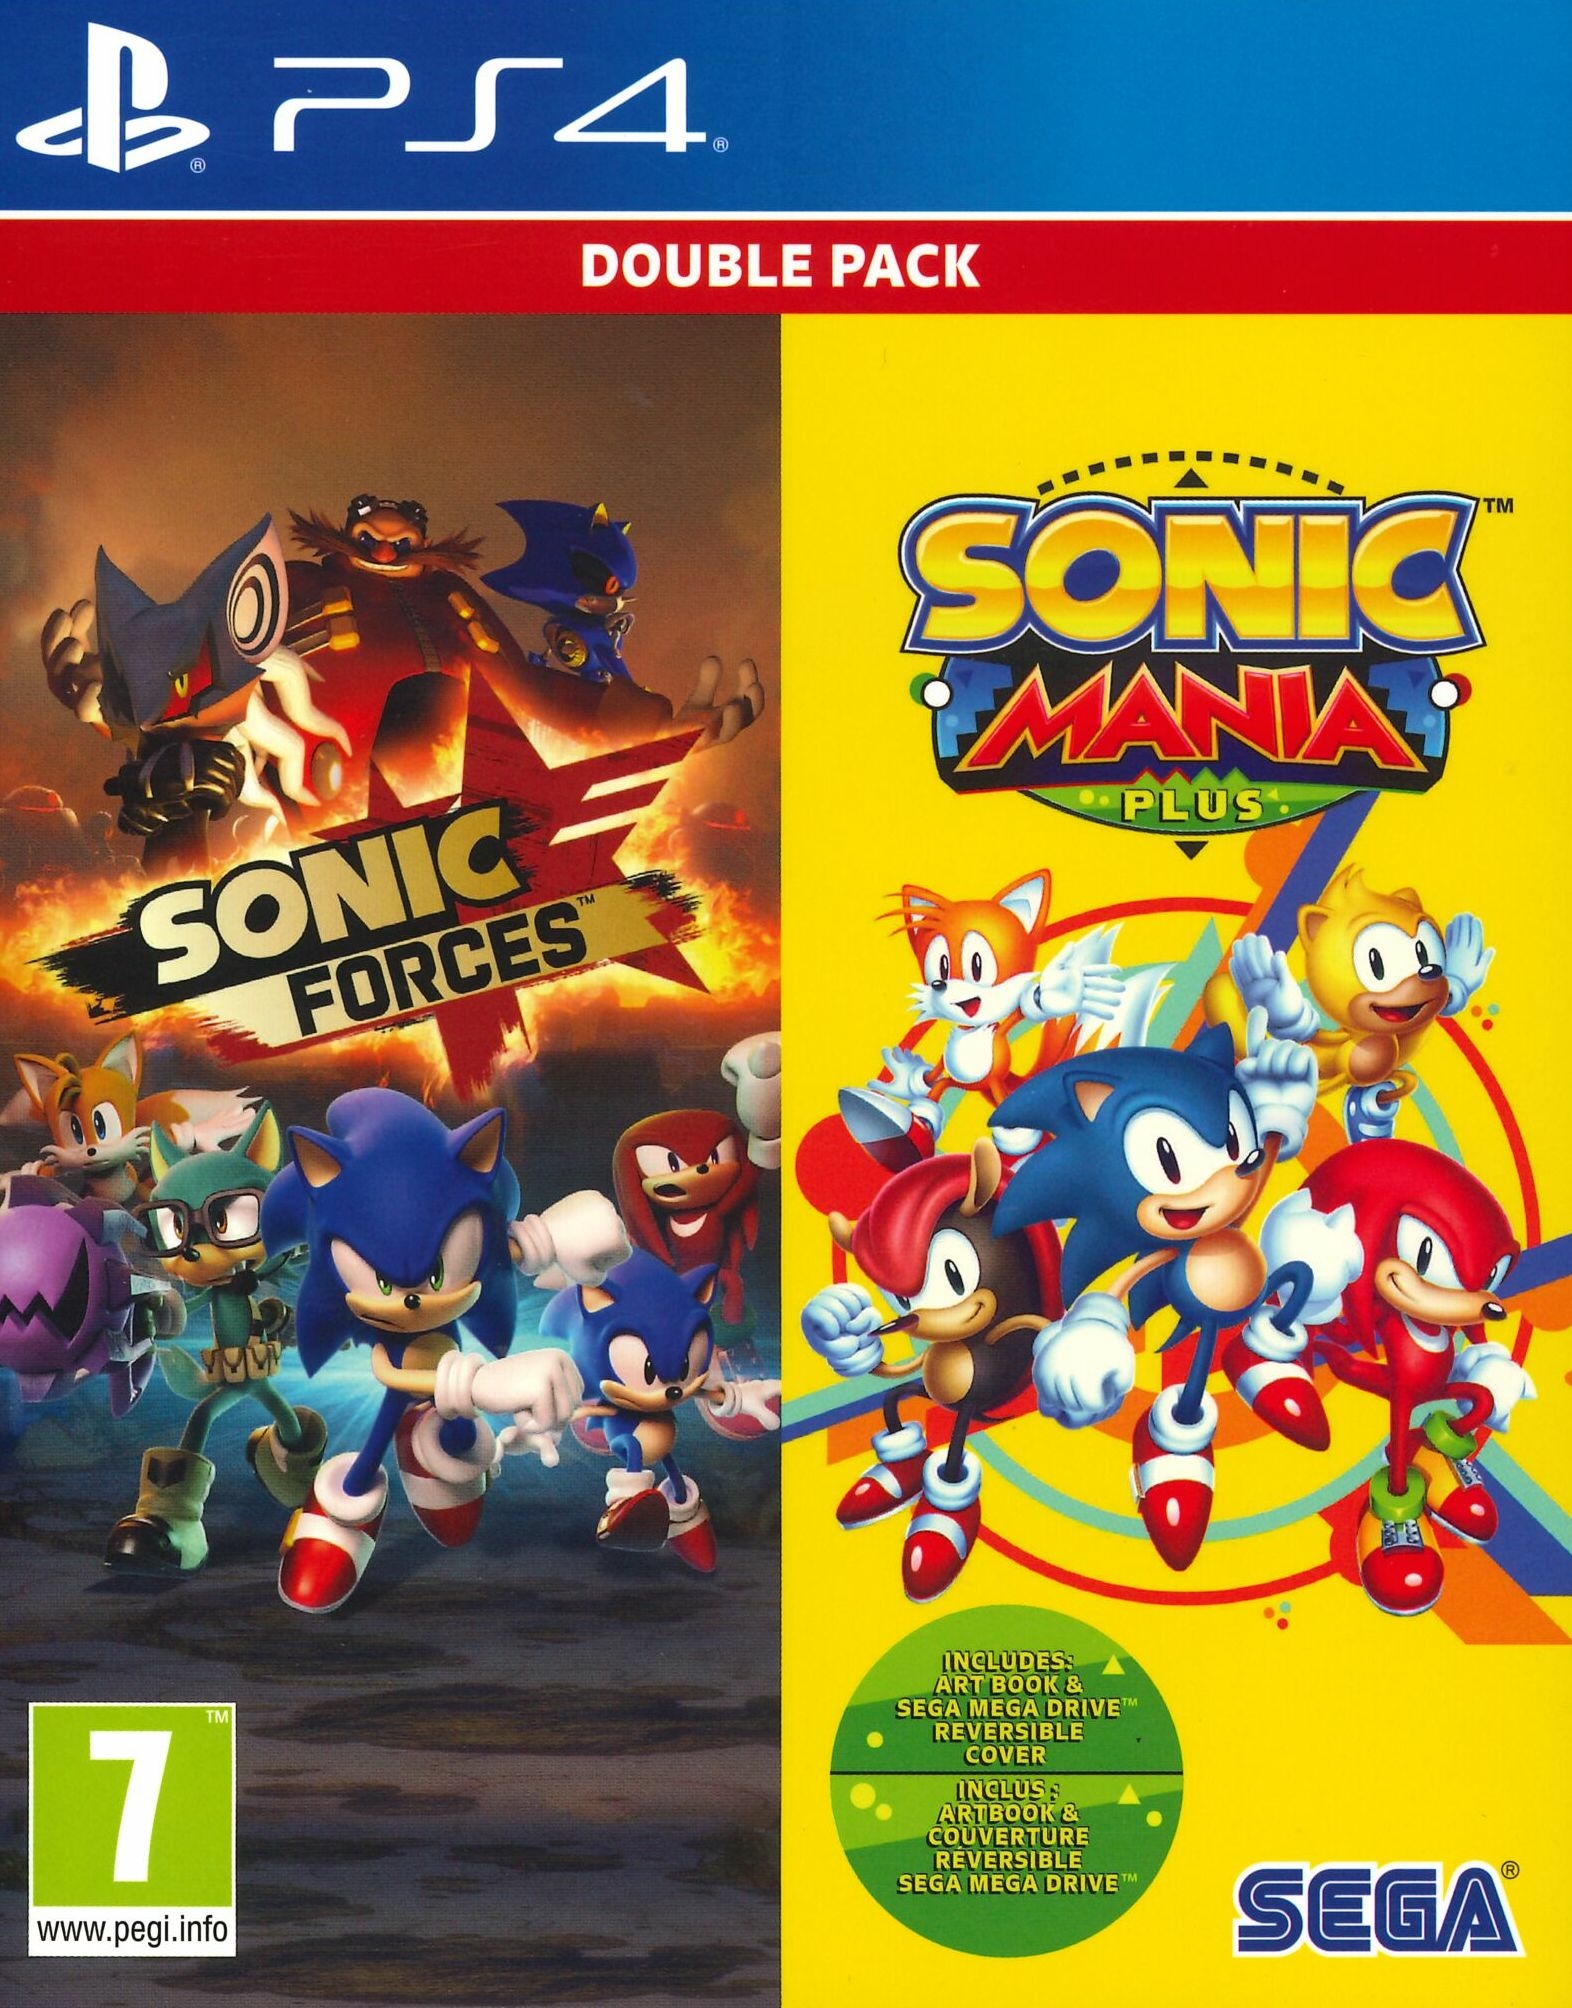 Sonic double pack (sonic forces + sonic mania plus) - PS4